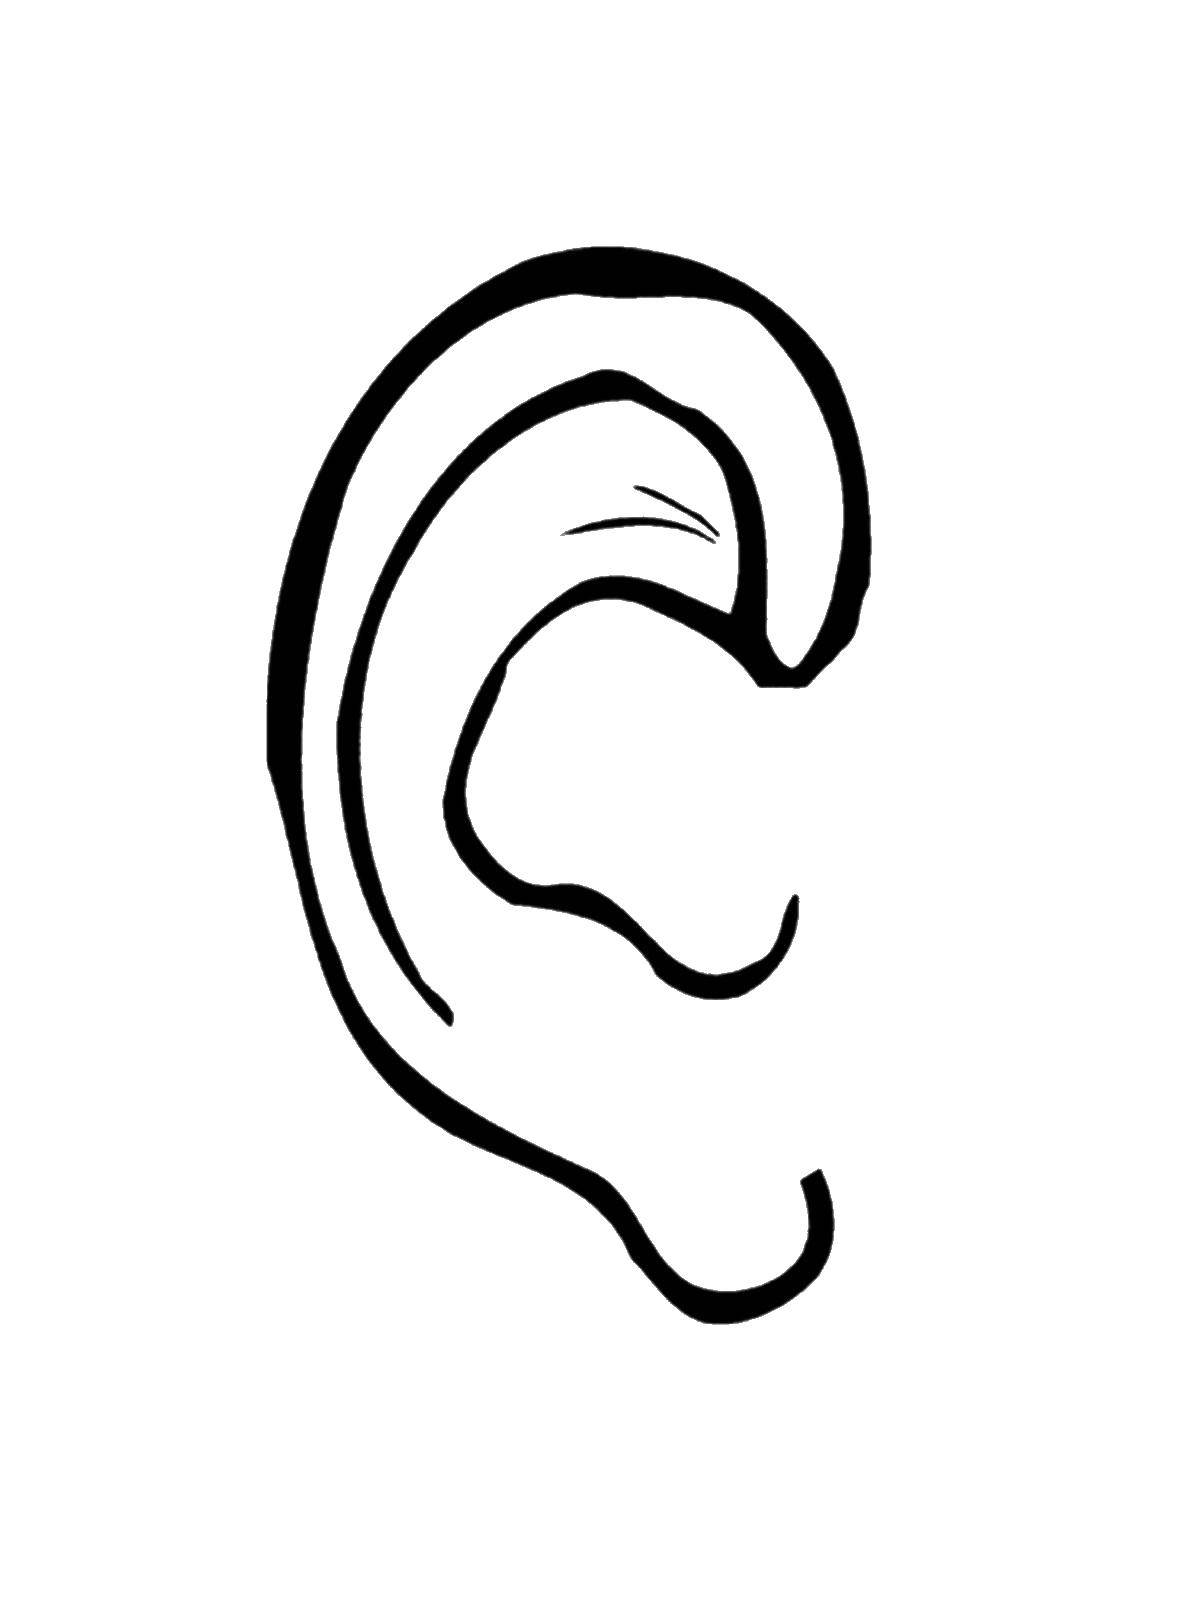 Coloring Auricle. Category The structure of the body. Tags:  Ear.